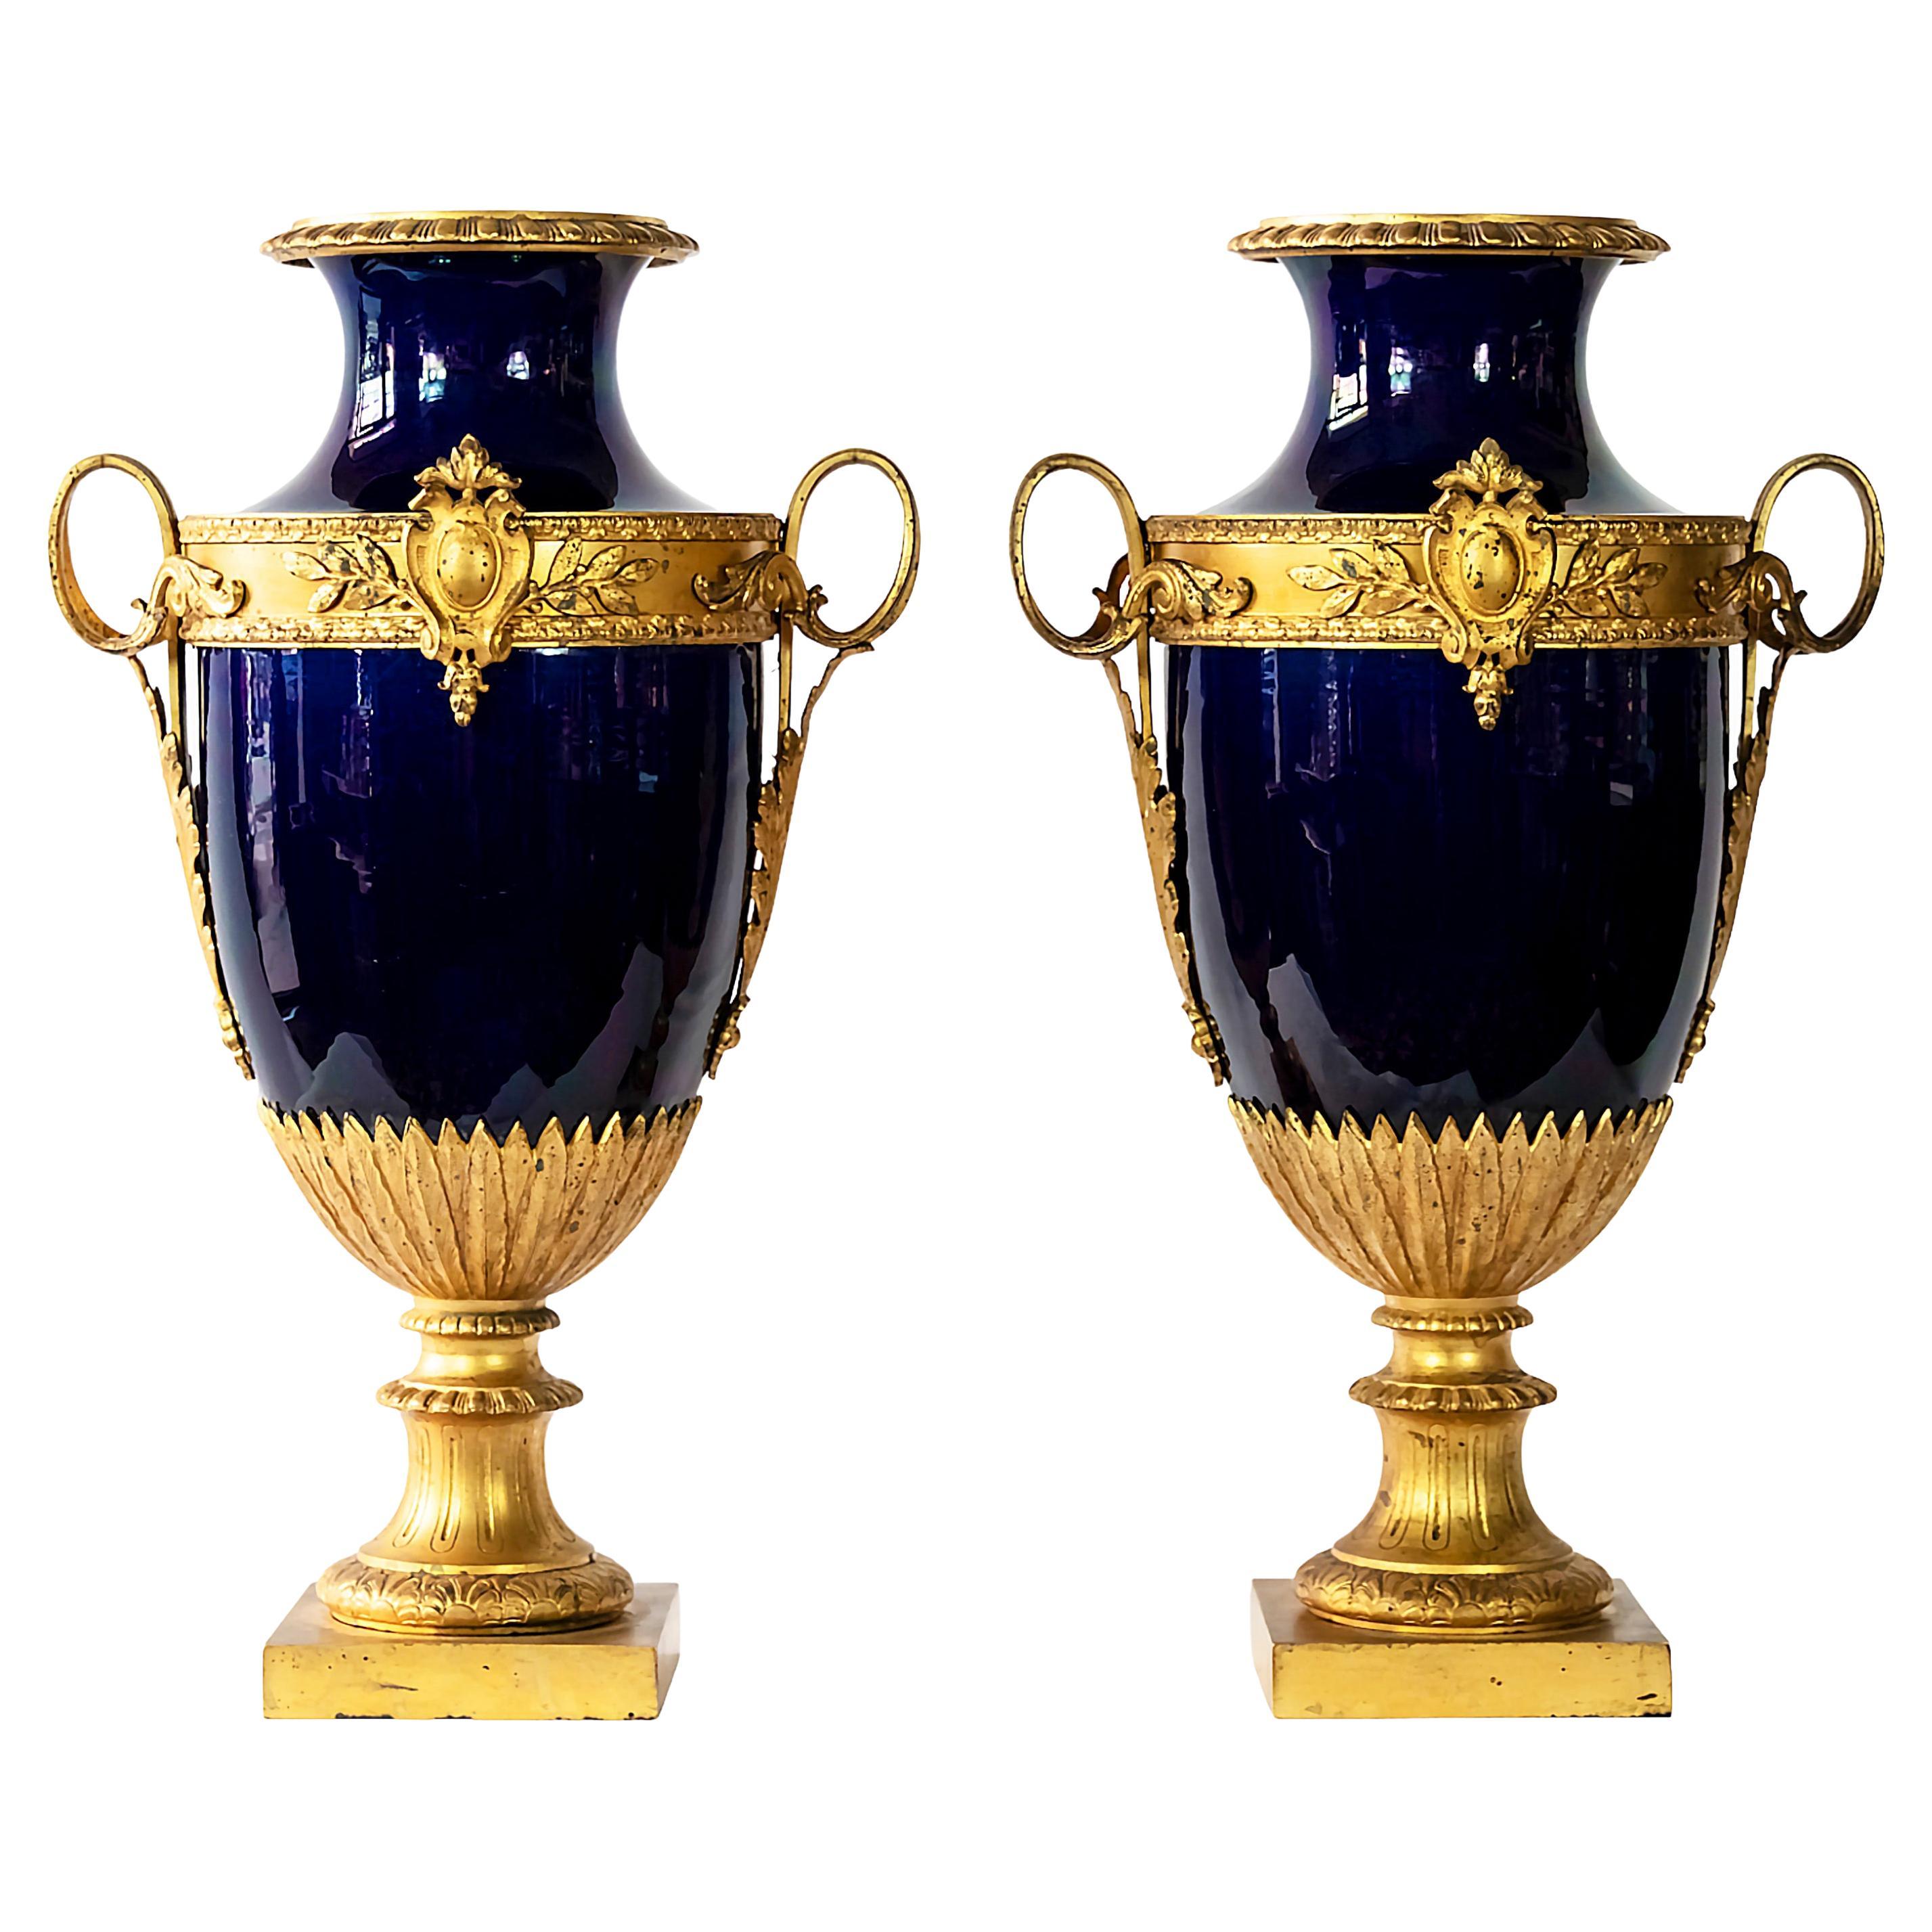 Pair of Antique French Sevres Style Porcelain Cobalt Blue and Bronze Vases